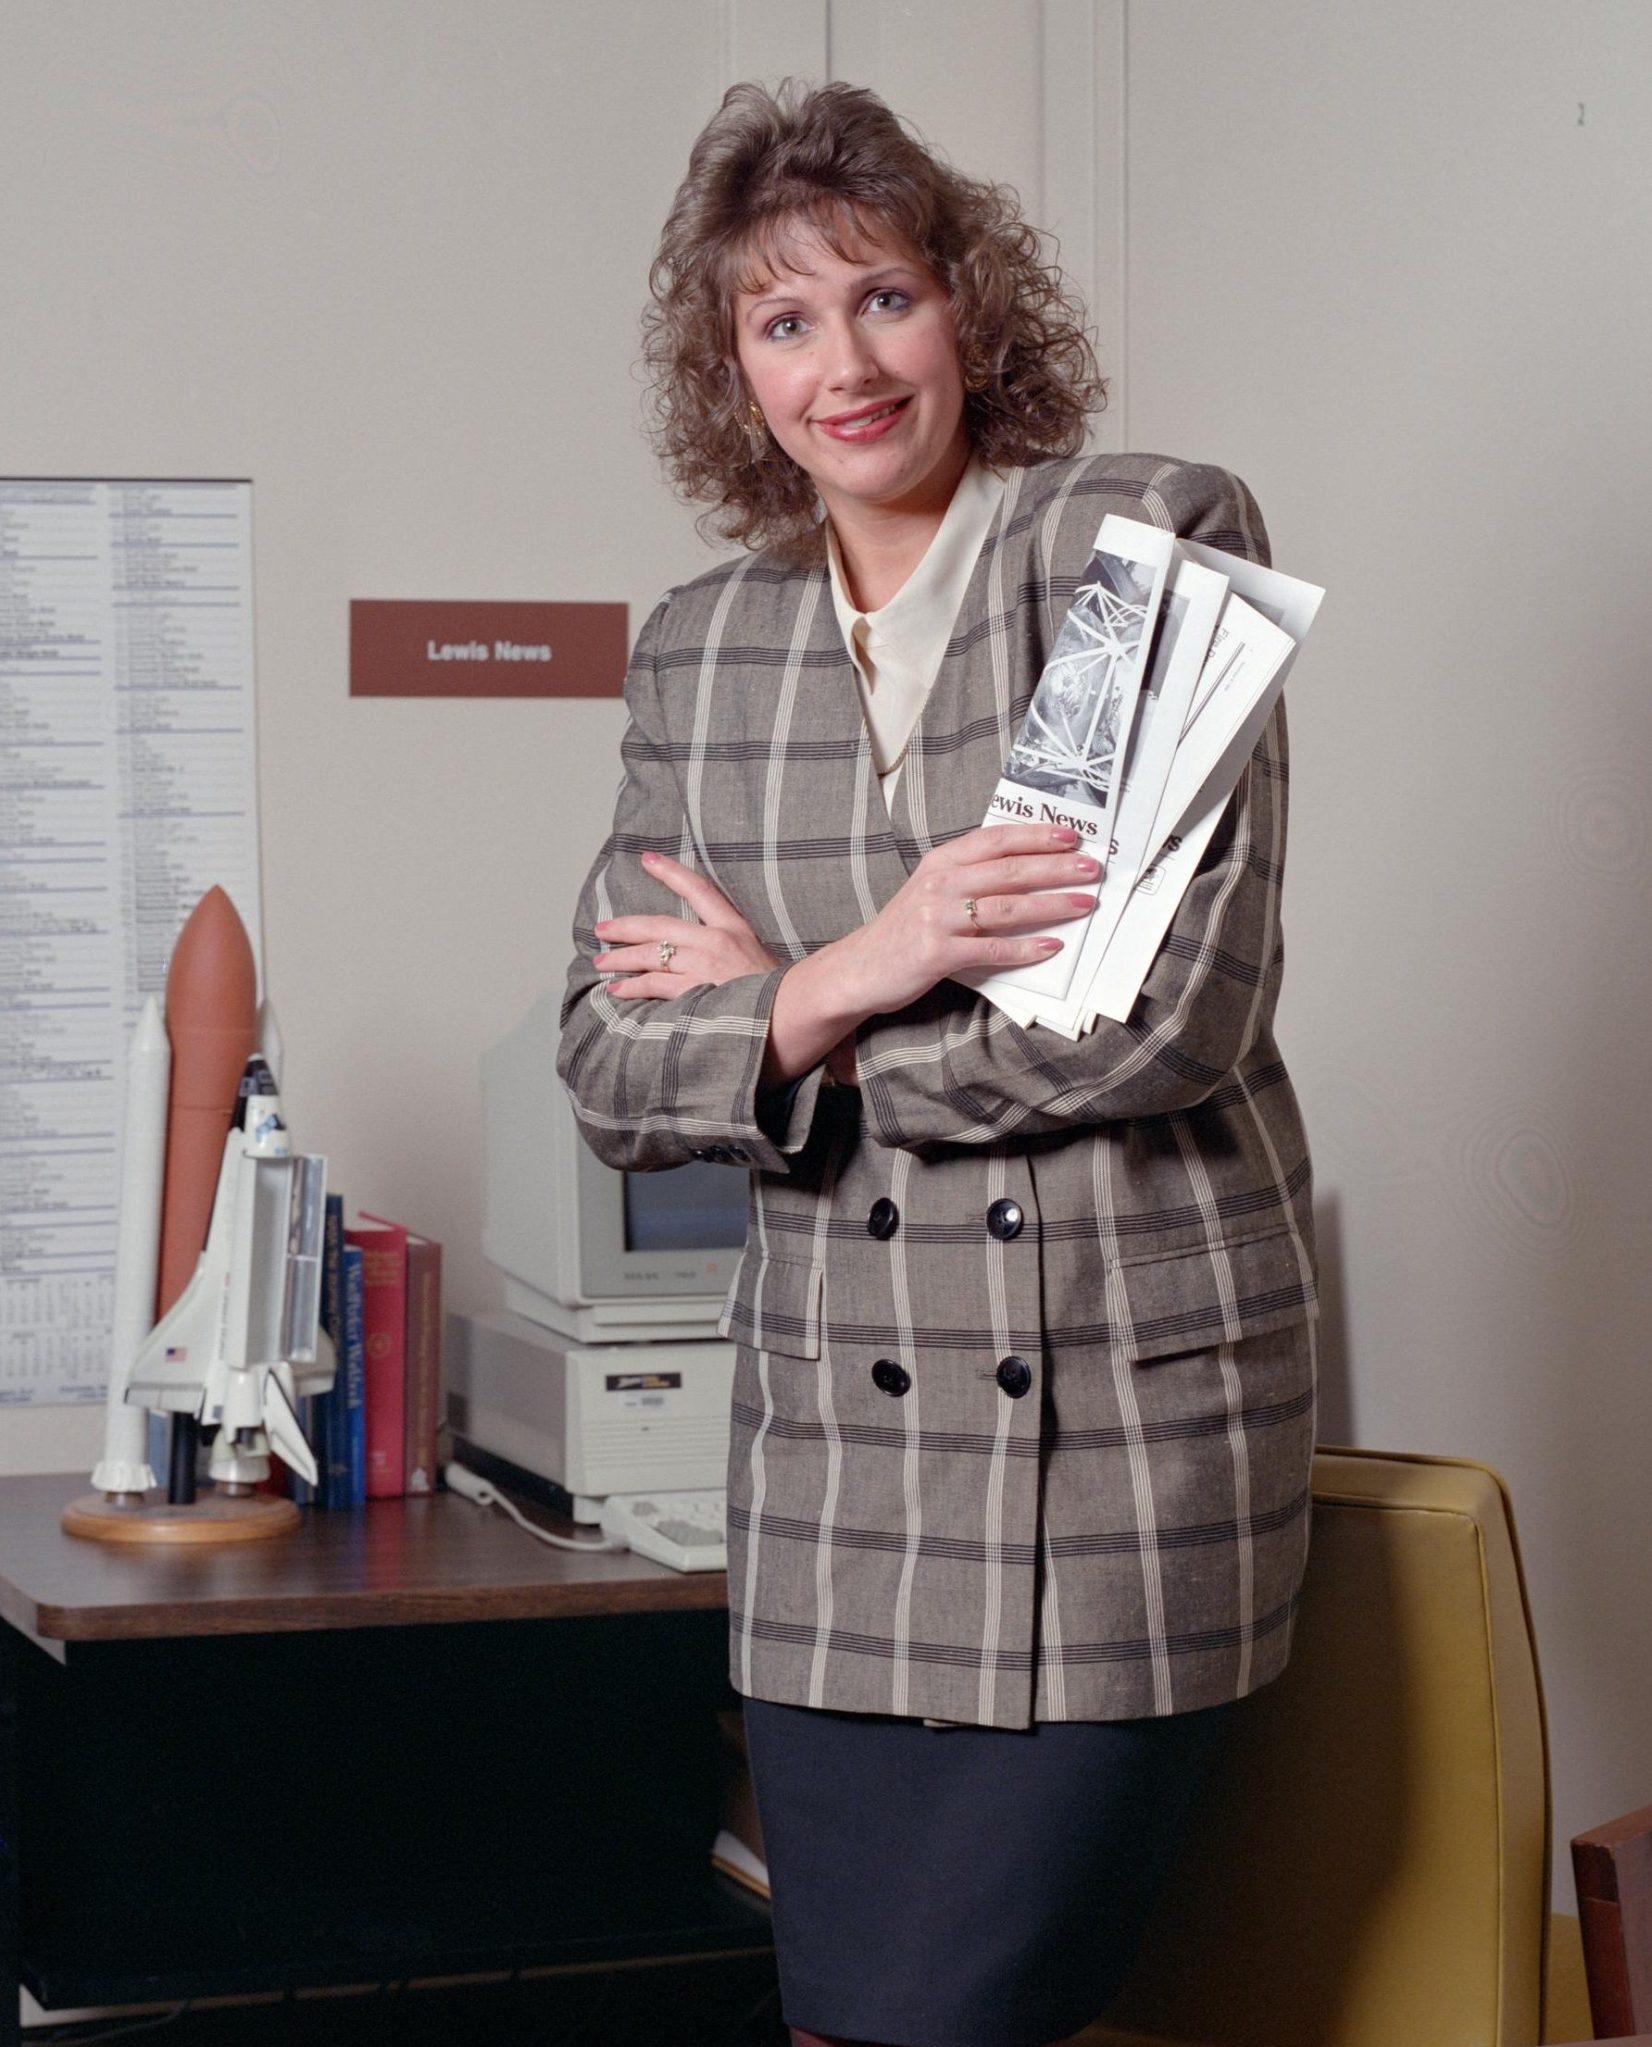 Woman standing in office holding newsletters.